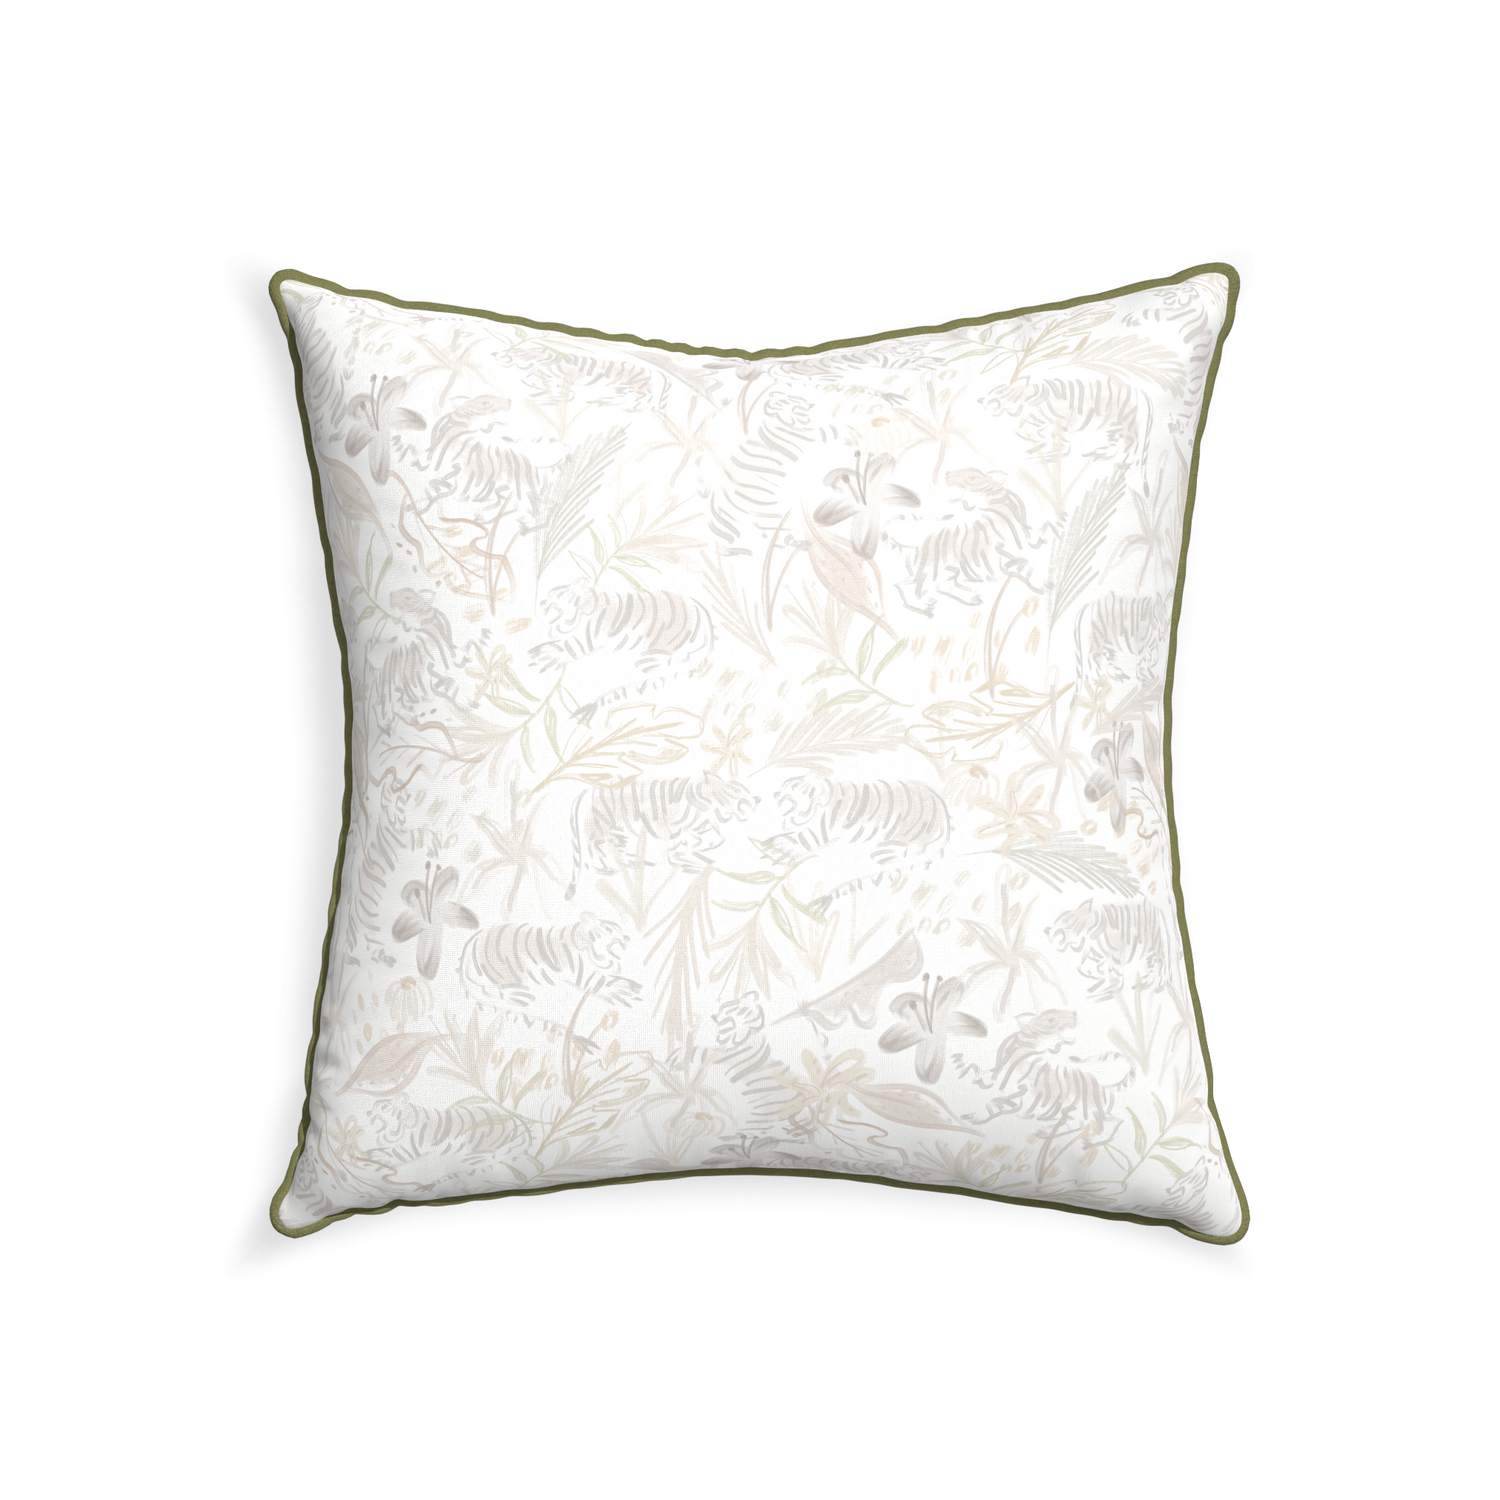 22-square frida sand custom beige chinoiserie tigerpillow with moss piping on white background